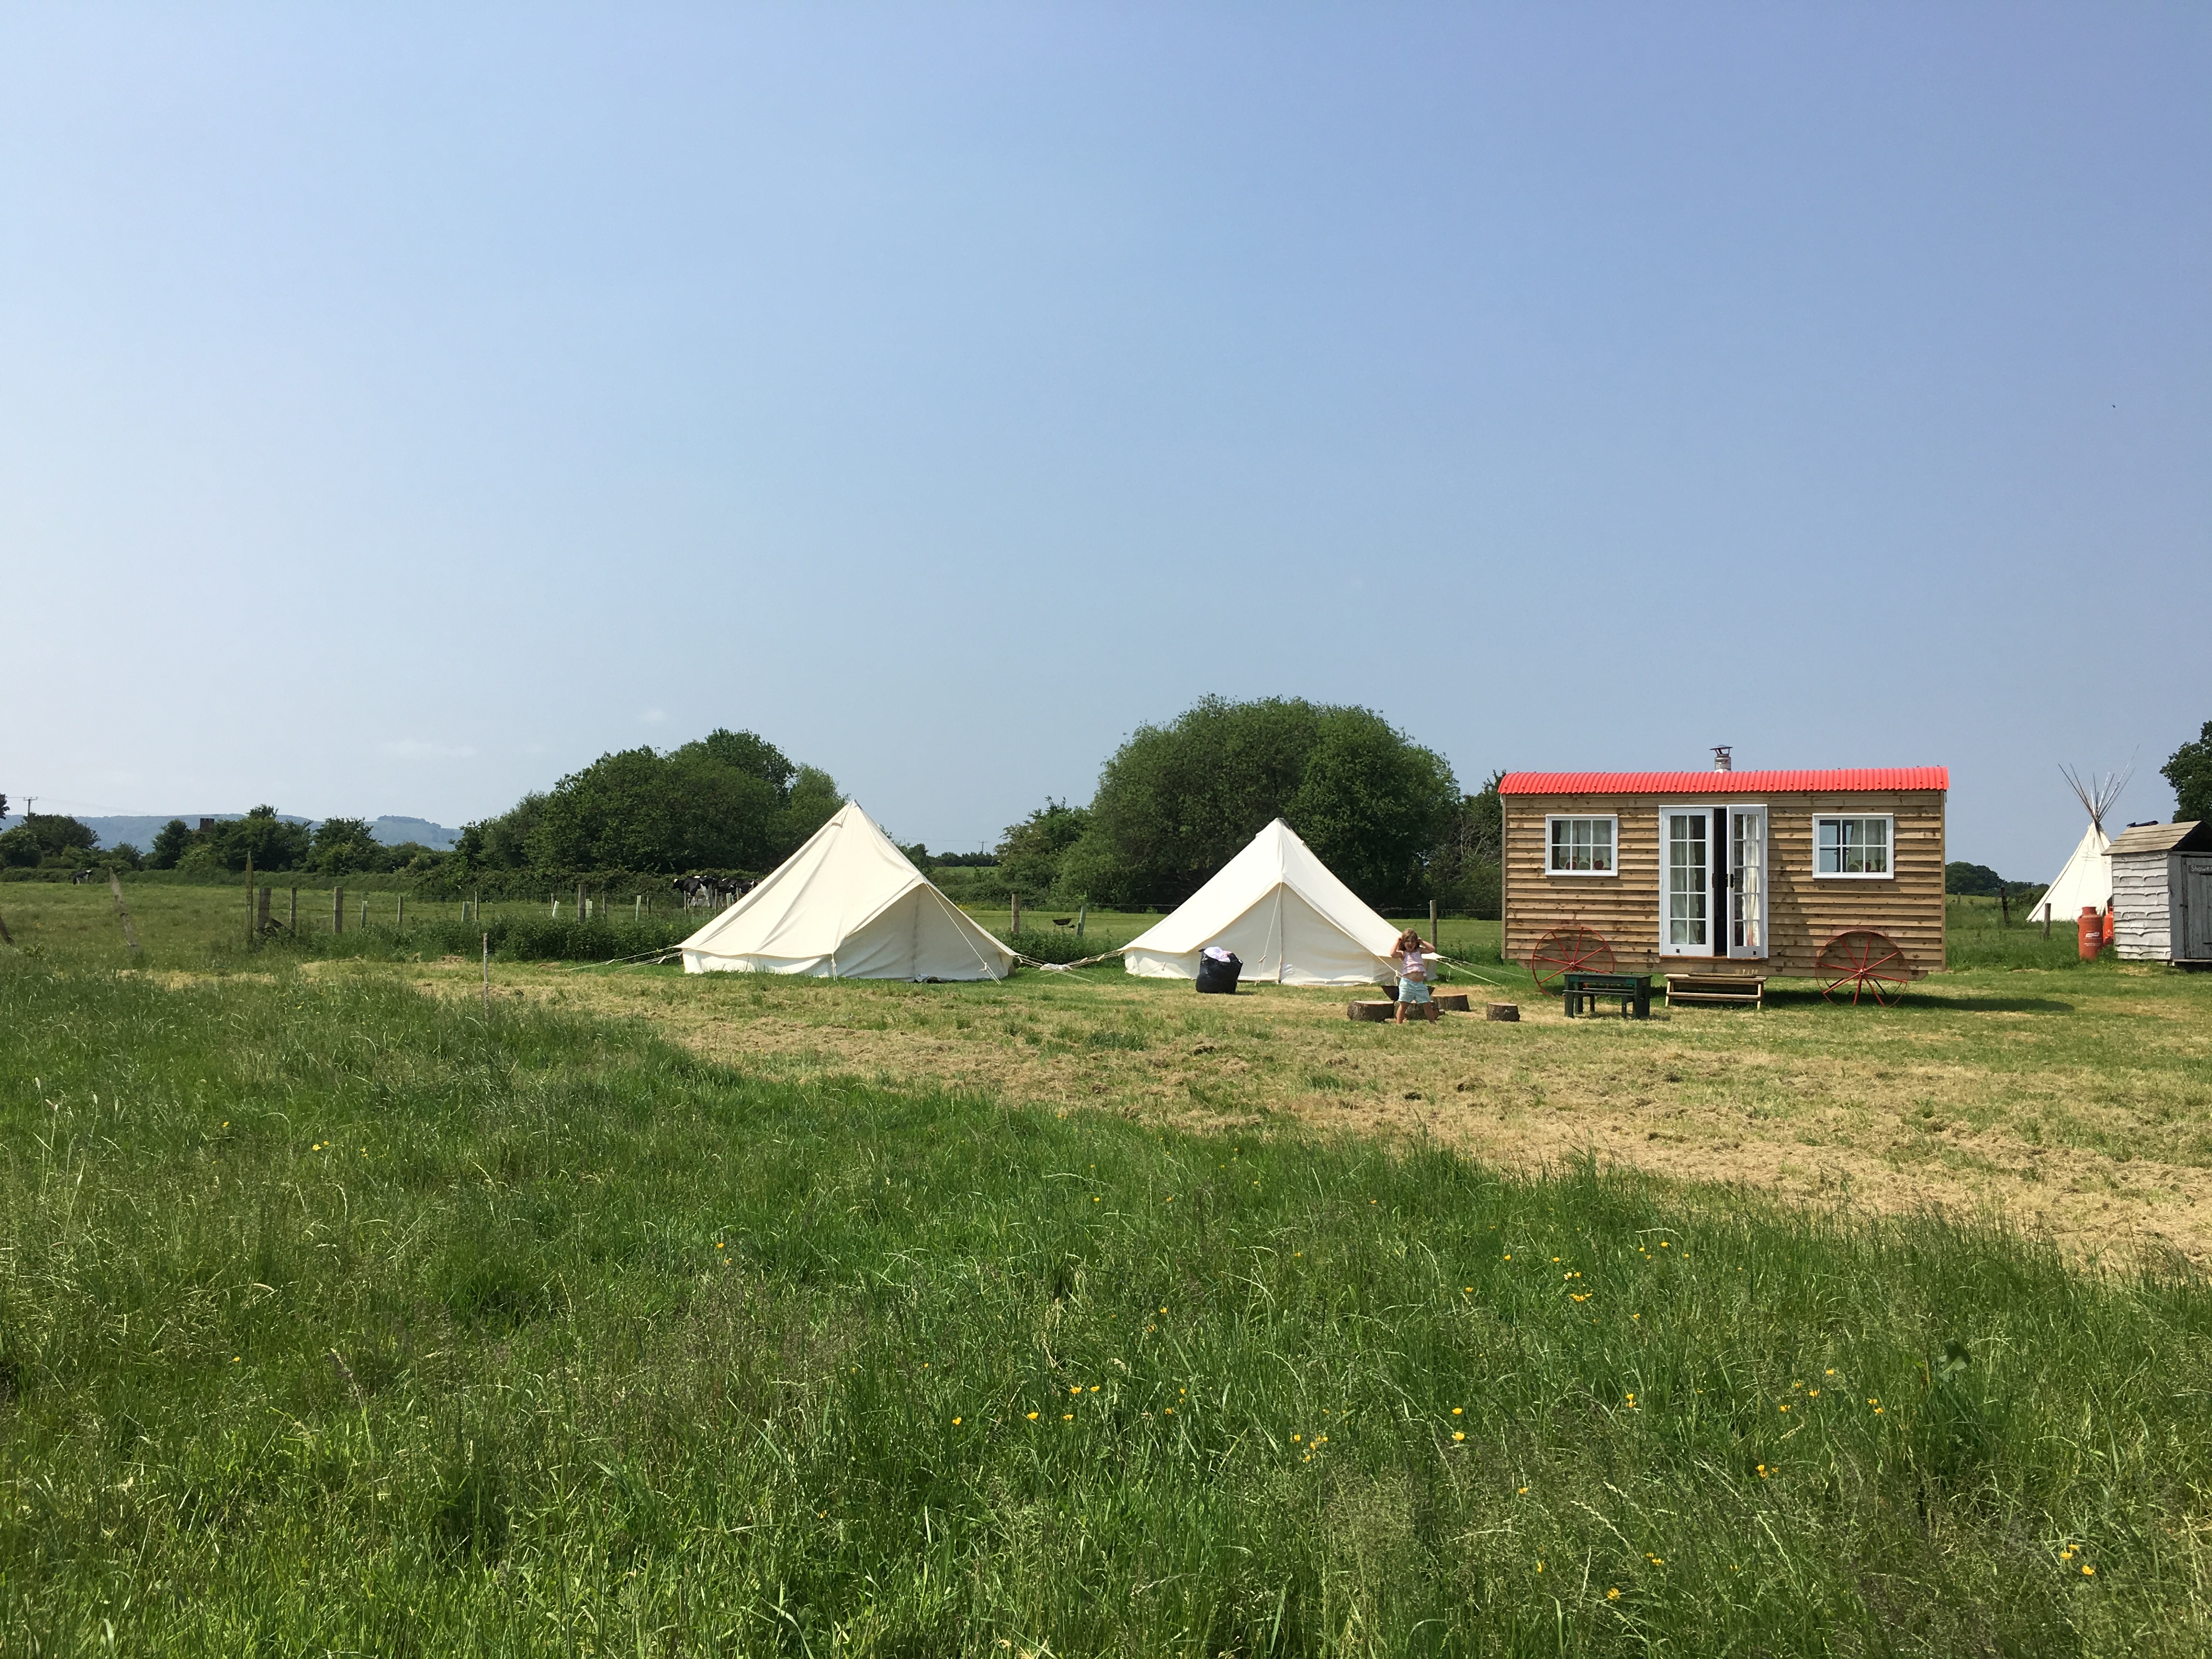 Campsite Warden and Bell tent production staff Required